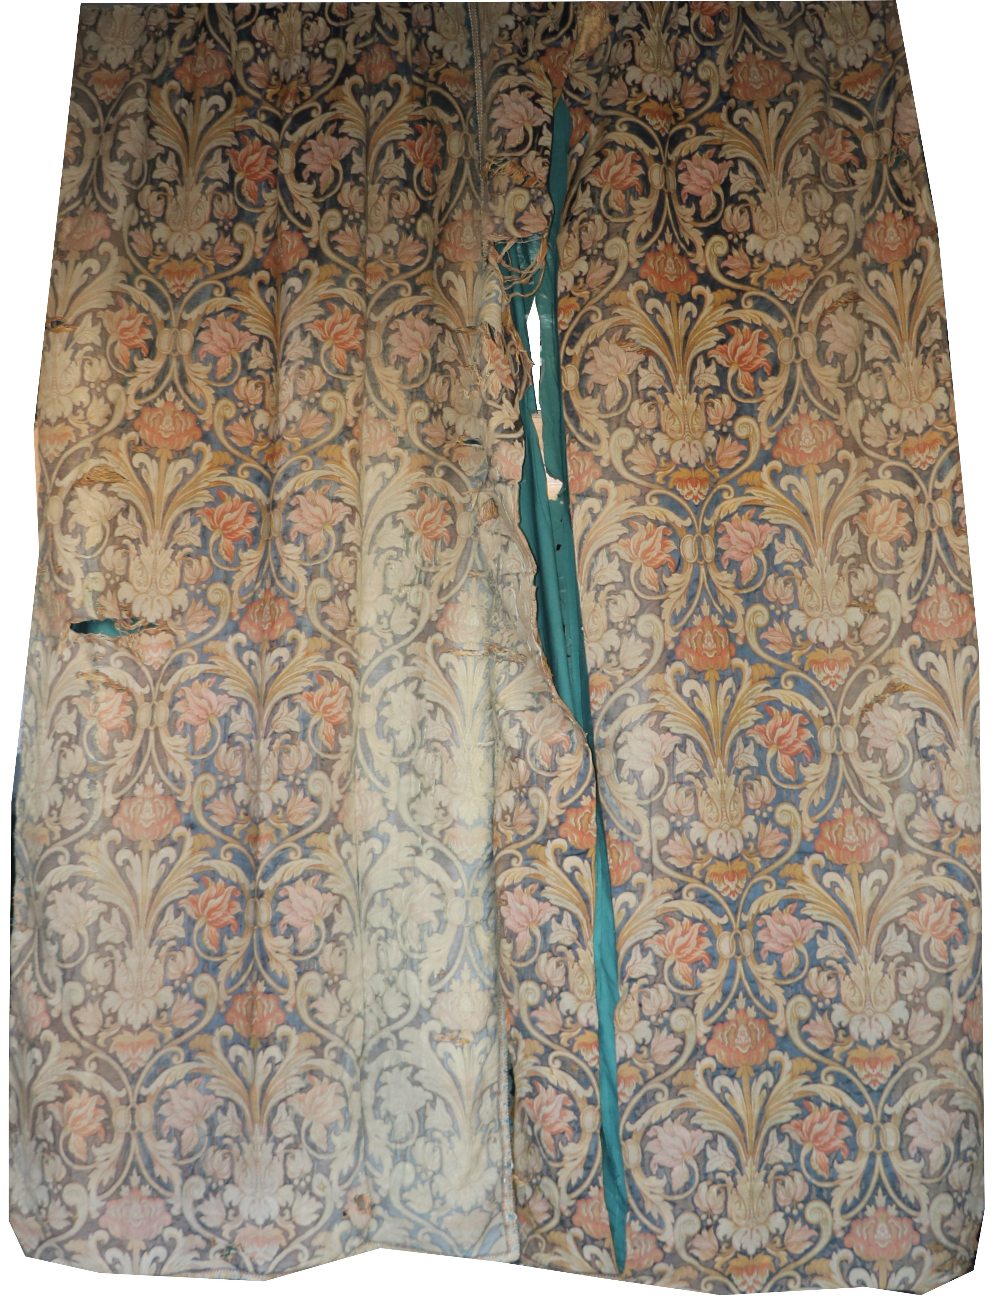 Three pairs of William Morris pattern lined Curtains, with scrolling flowers,